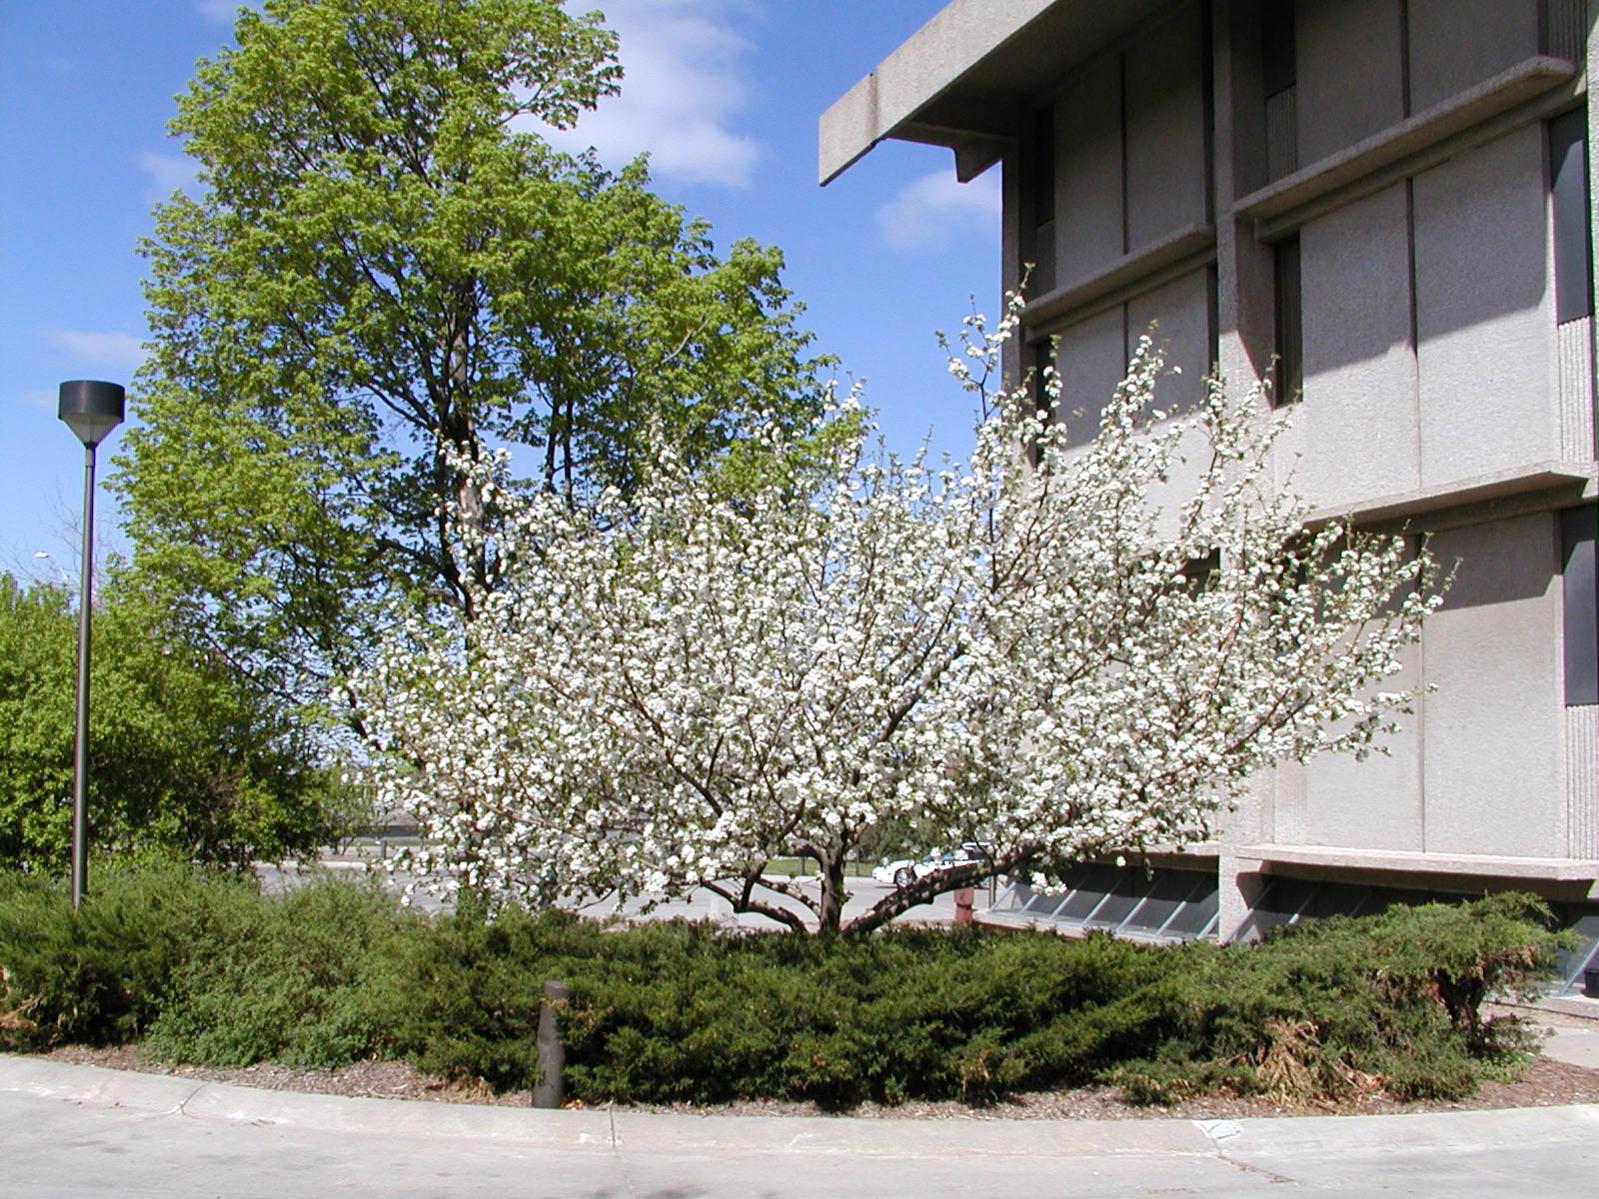 The university's original Newton Apple Tree, shown in this file photo in full bloom outside Behlen Laboratory, was recently removed due its deteriorating health..  